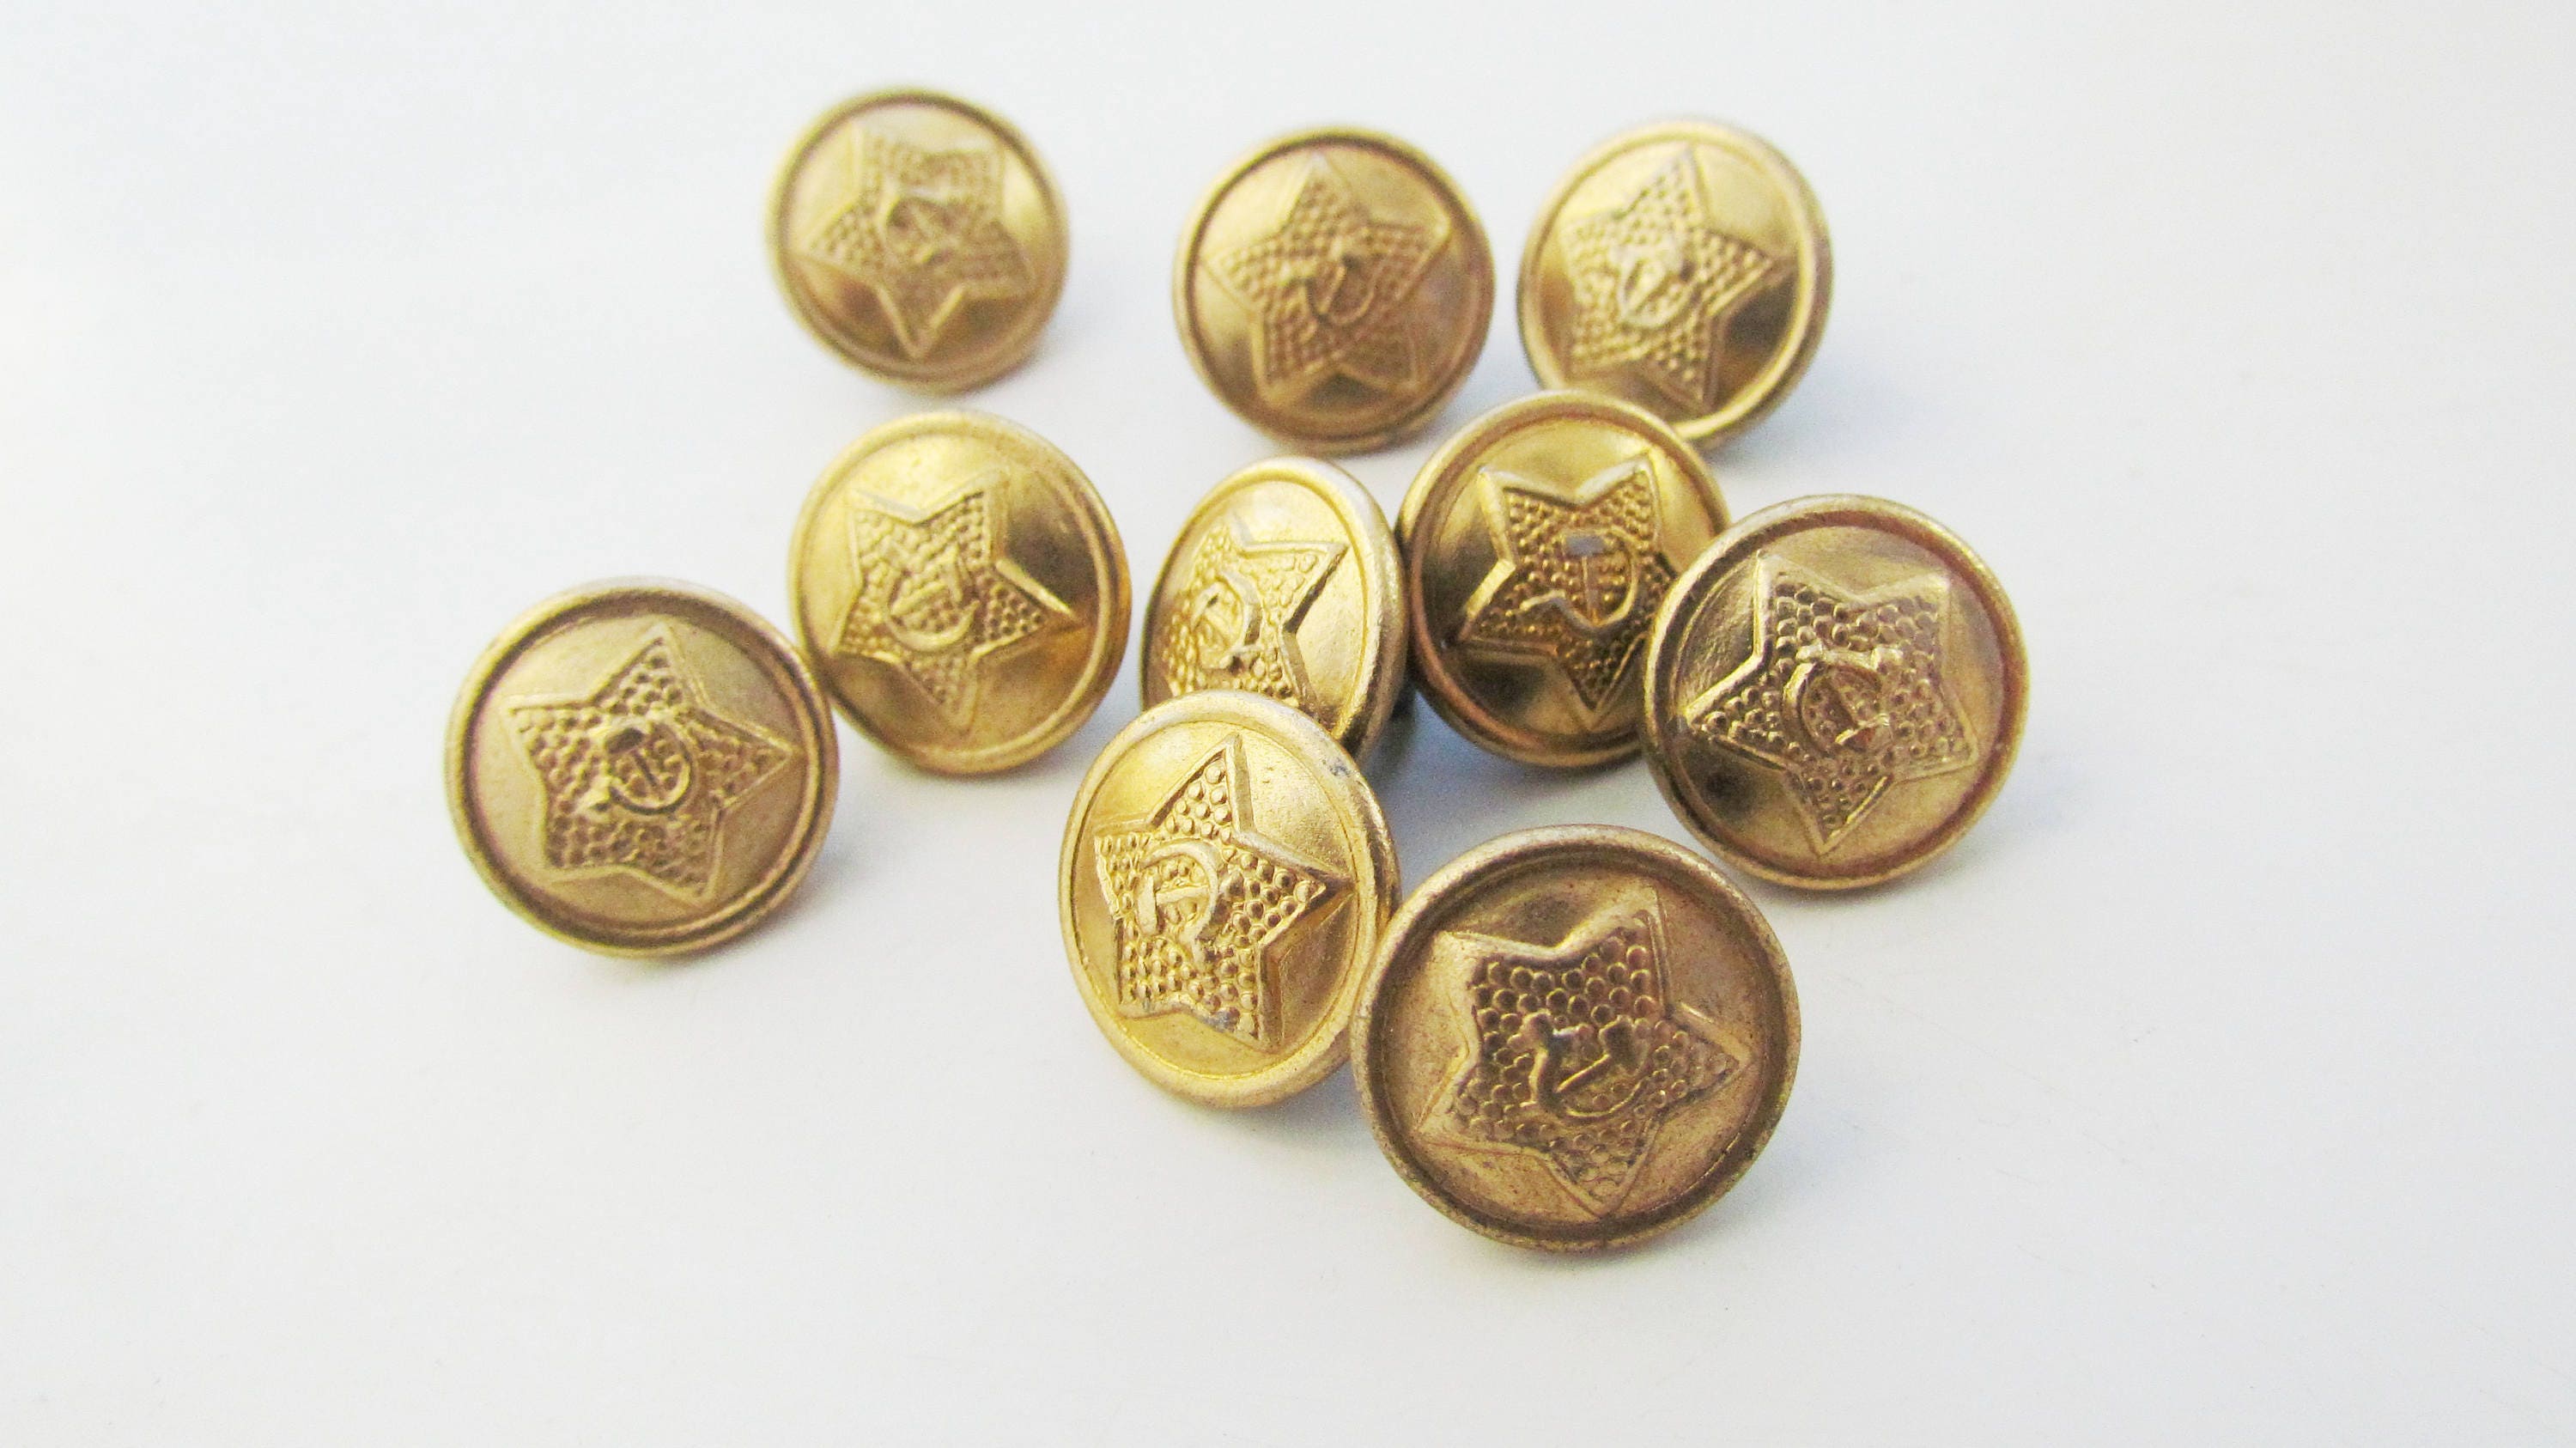 Vintage Army buttons soviet military buttons soviet buttons